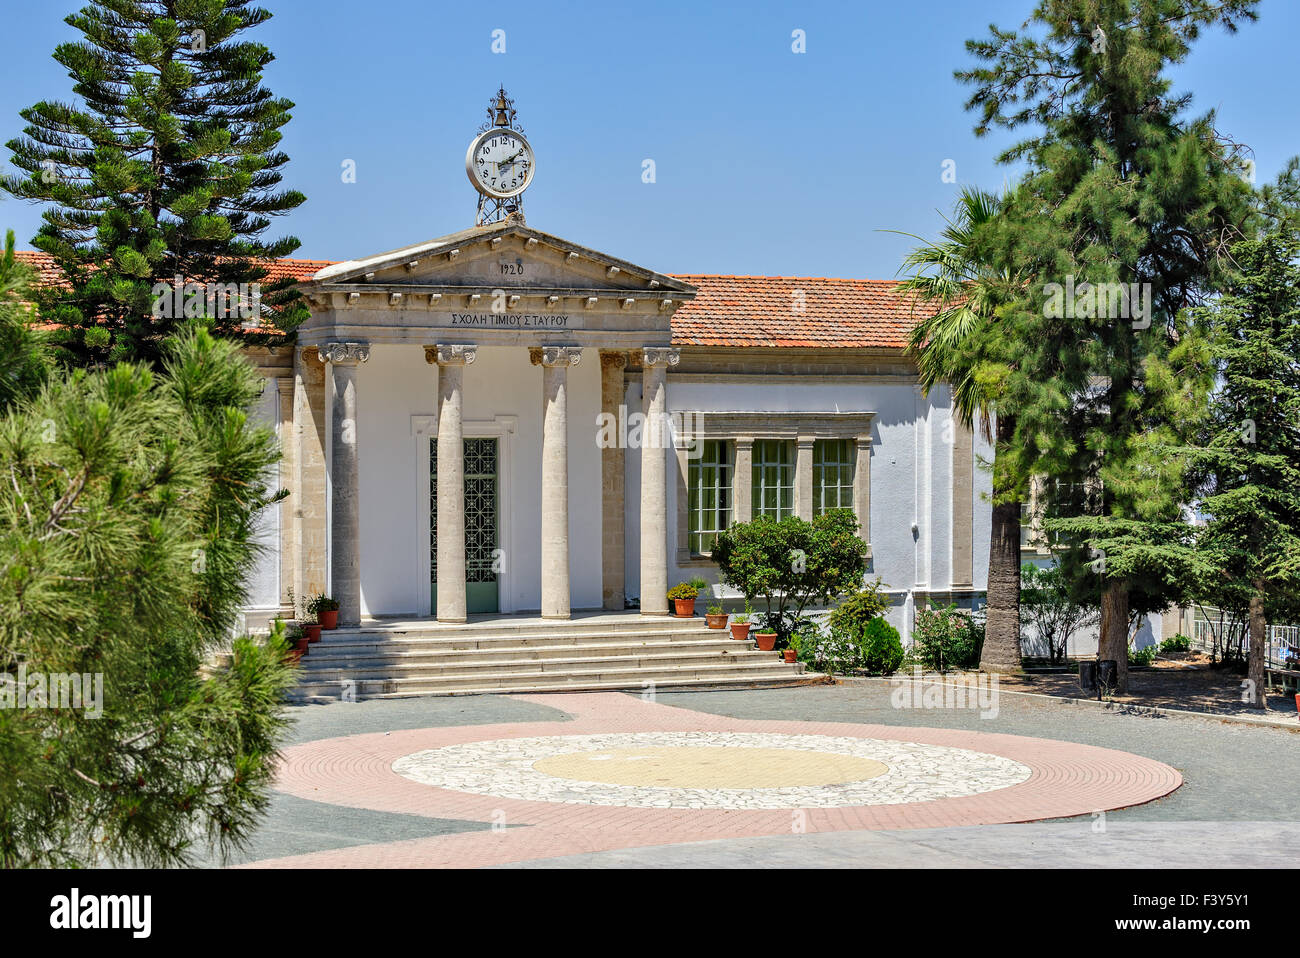 Town Hall in village on Cyprus Stock Photo